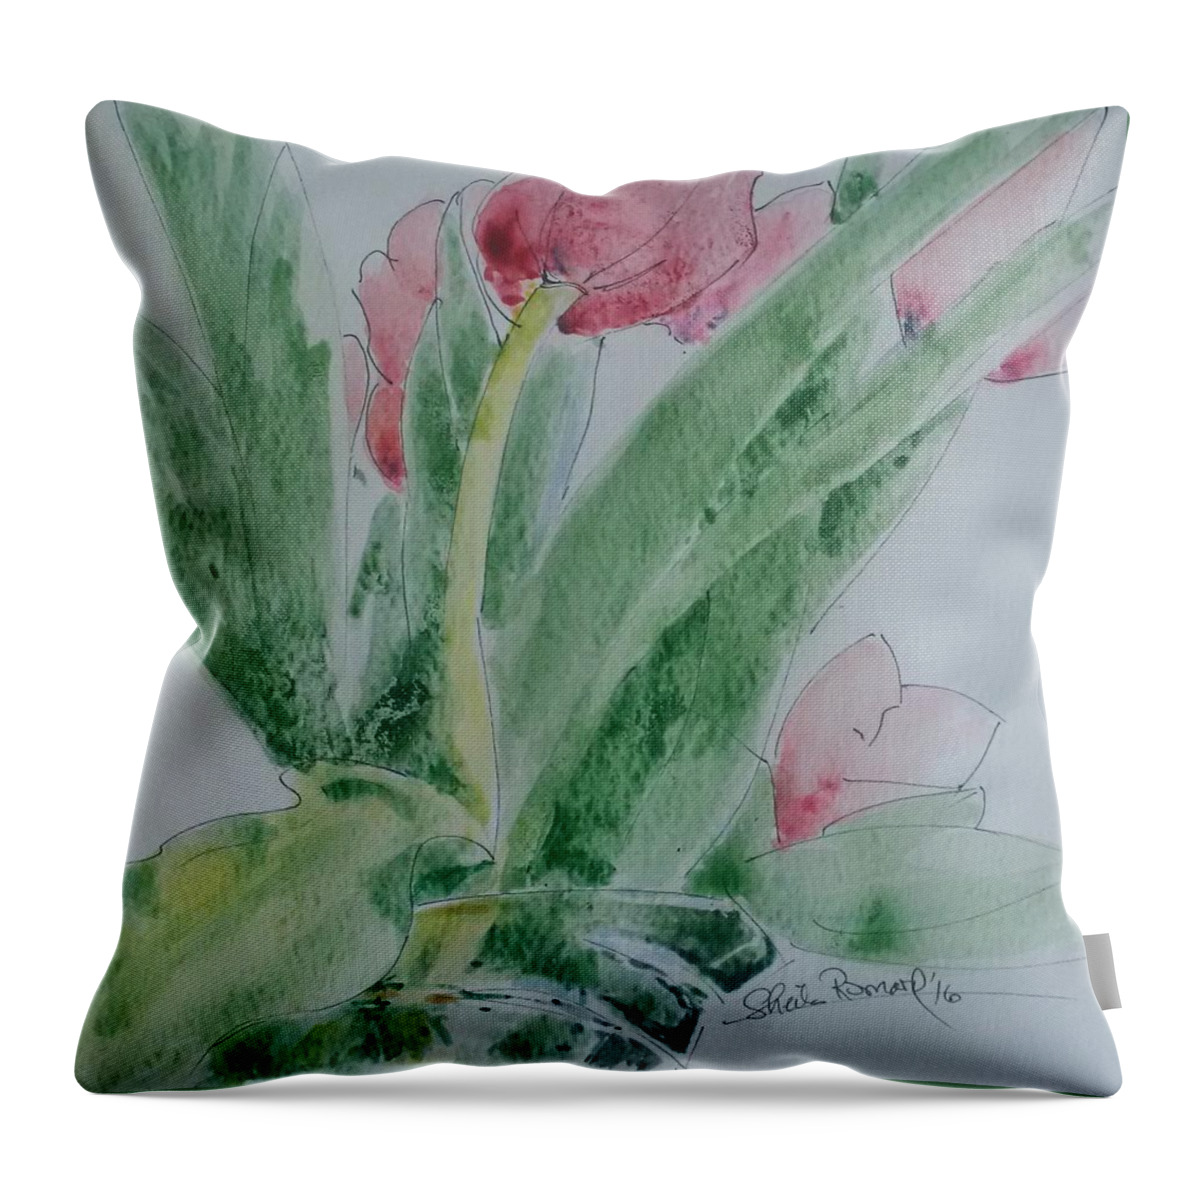 Tulips Throw Pillow featuring the painting Tulips by Sheila Romard